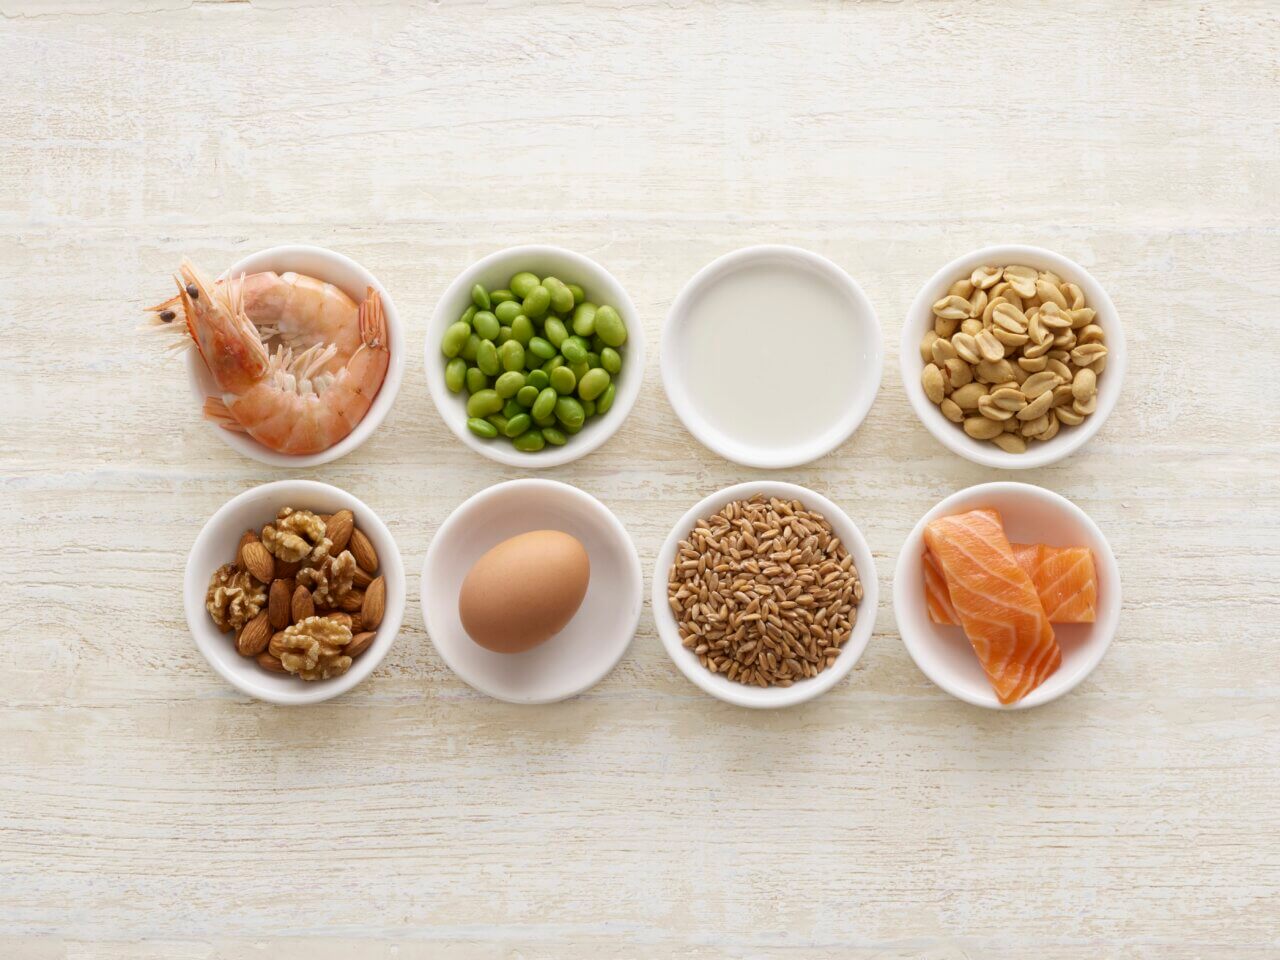 common food allergens to test for